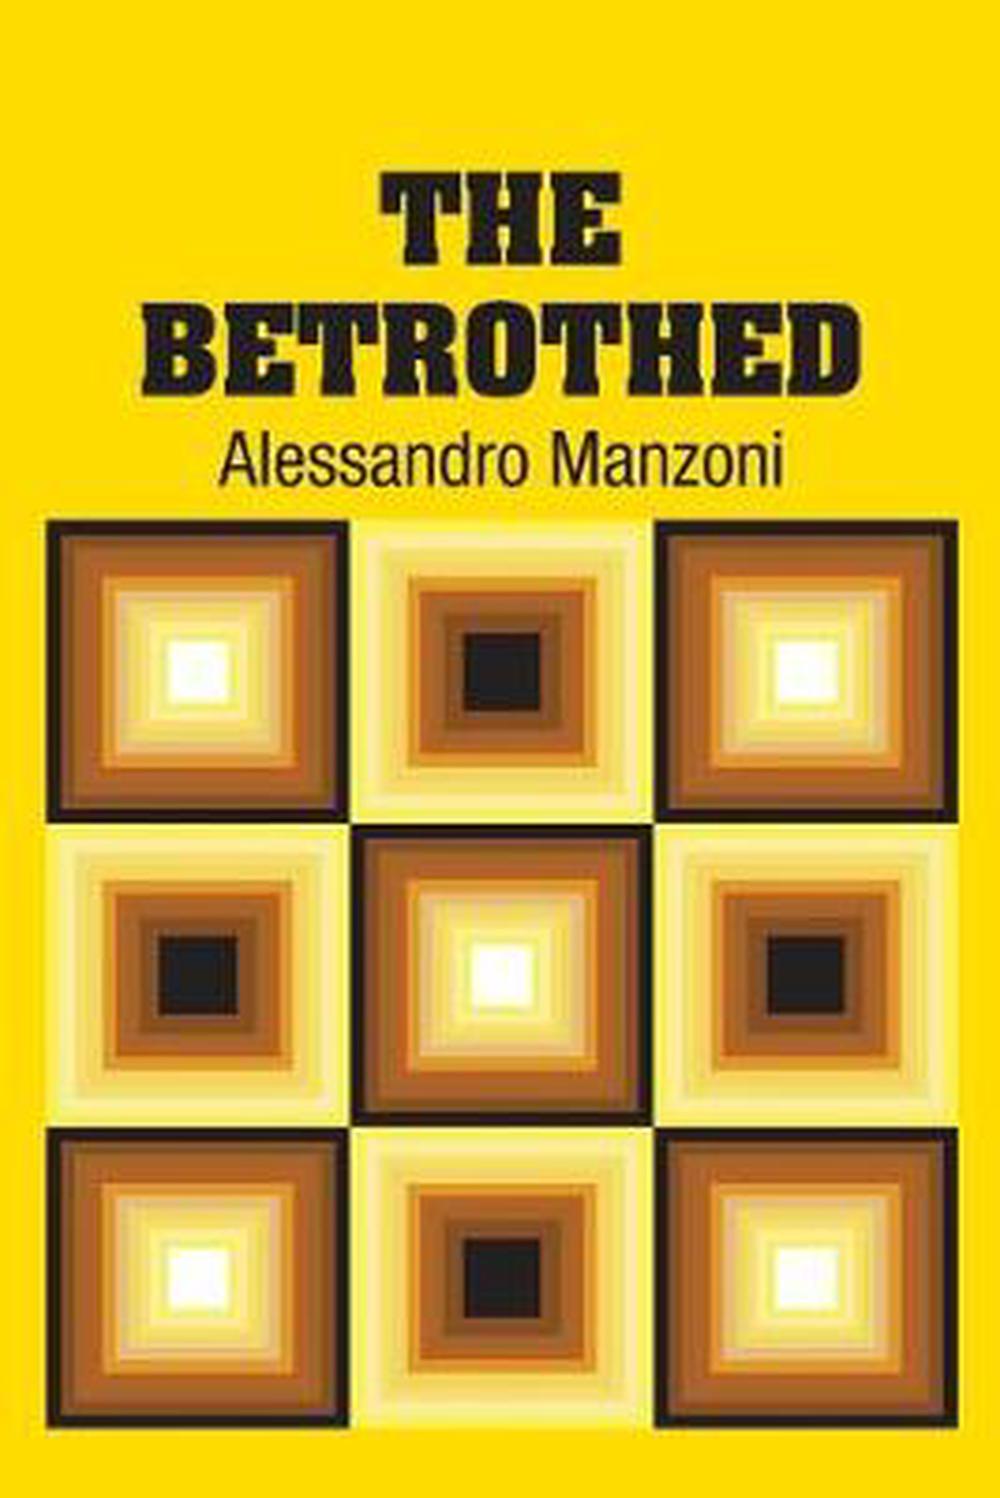 the betrothed by alessandro manzoni